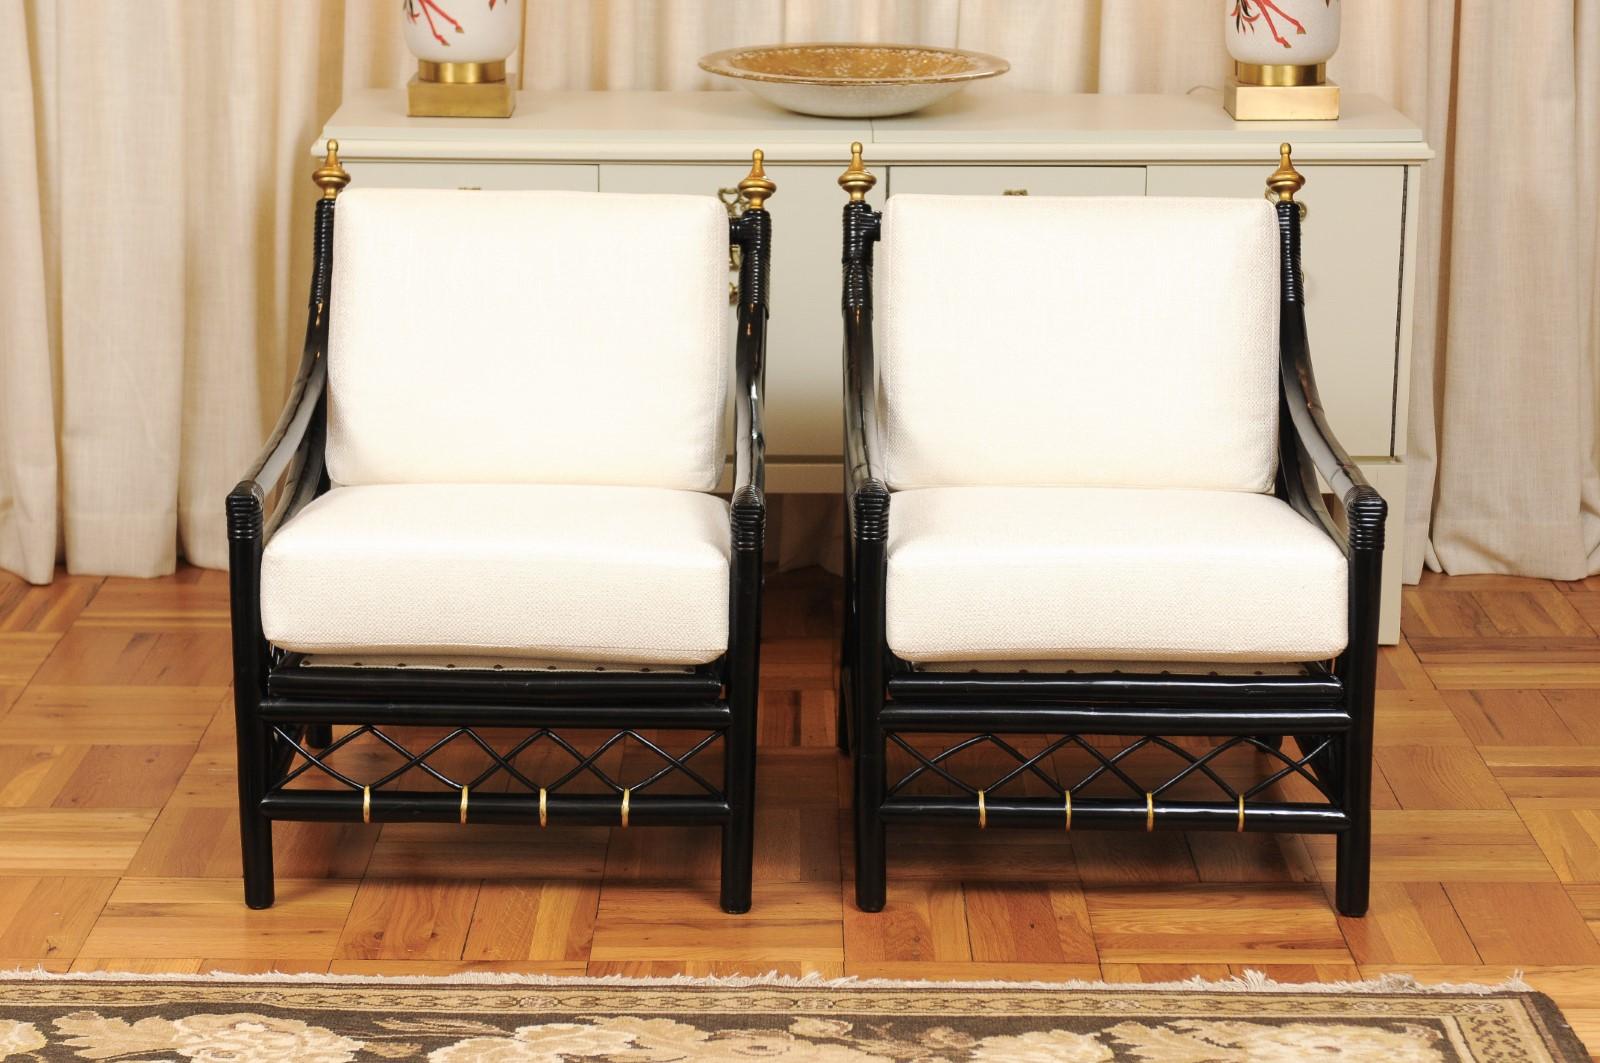 Elegant Restored Pair of Throne Loungers by Willow and Reed, circa 1955 In Excellent Condition For Sale In Atlanta, GA